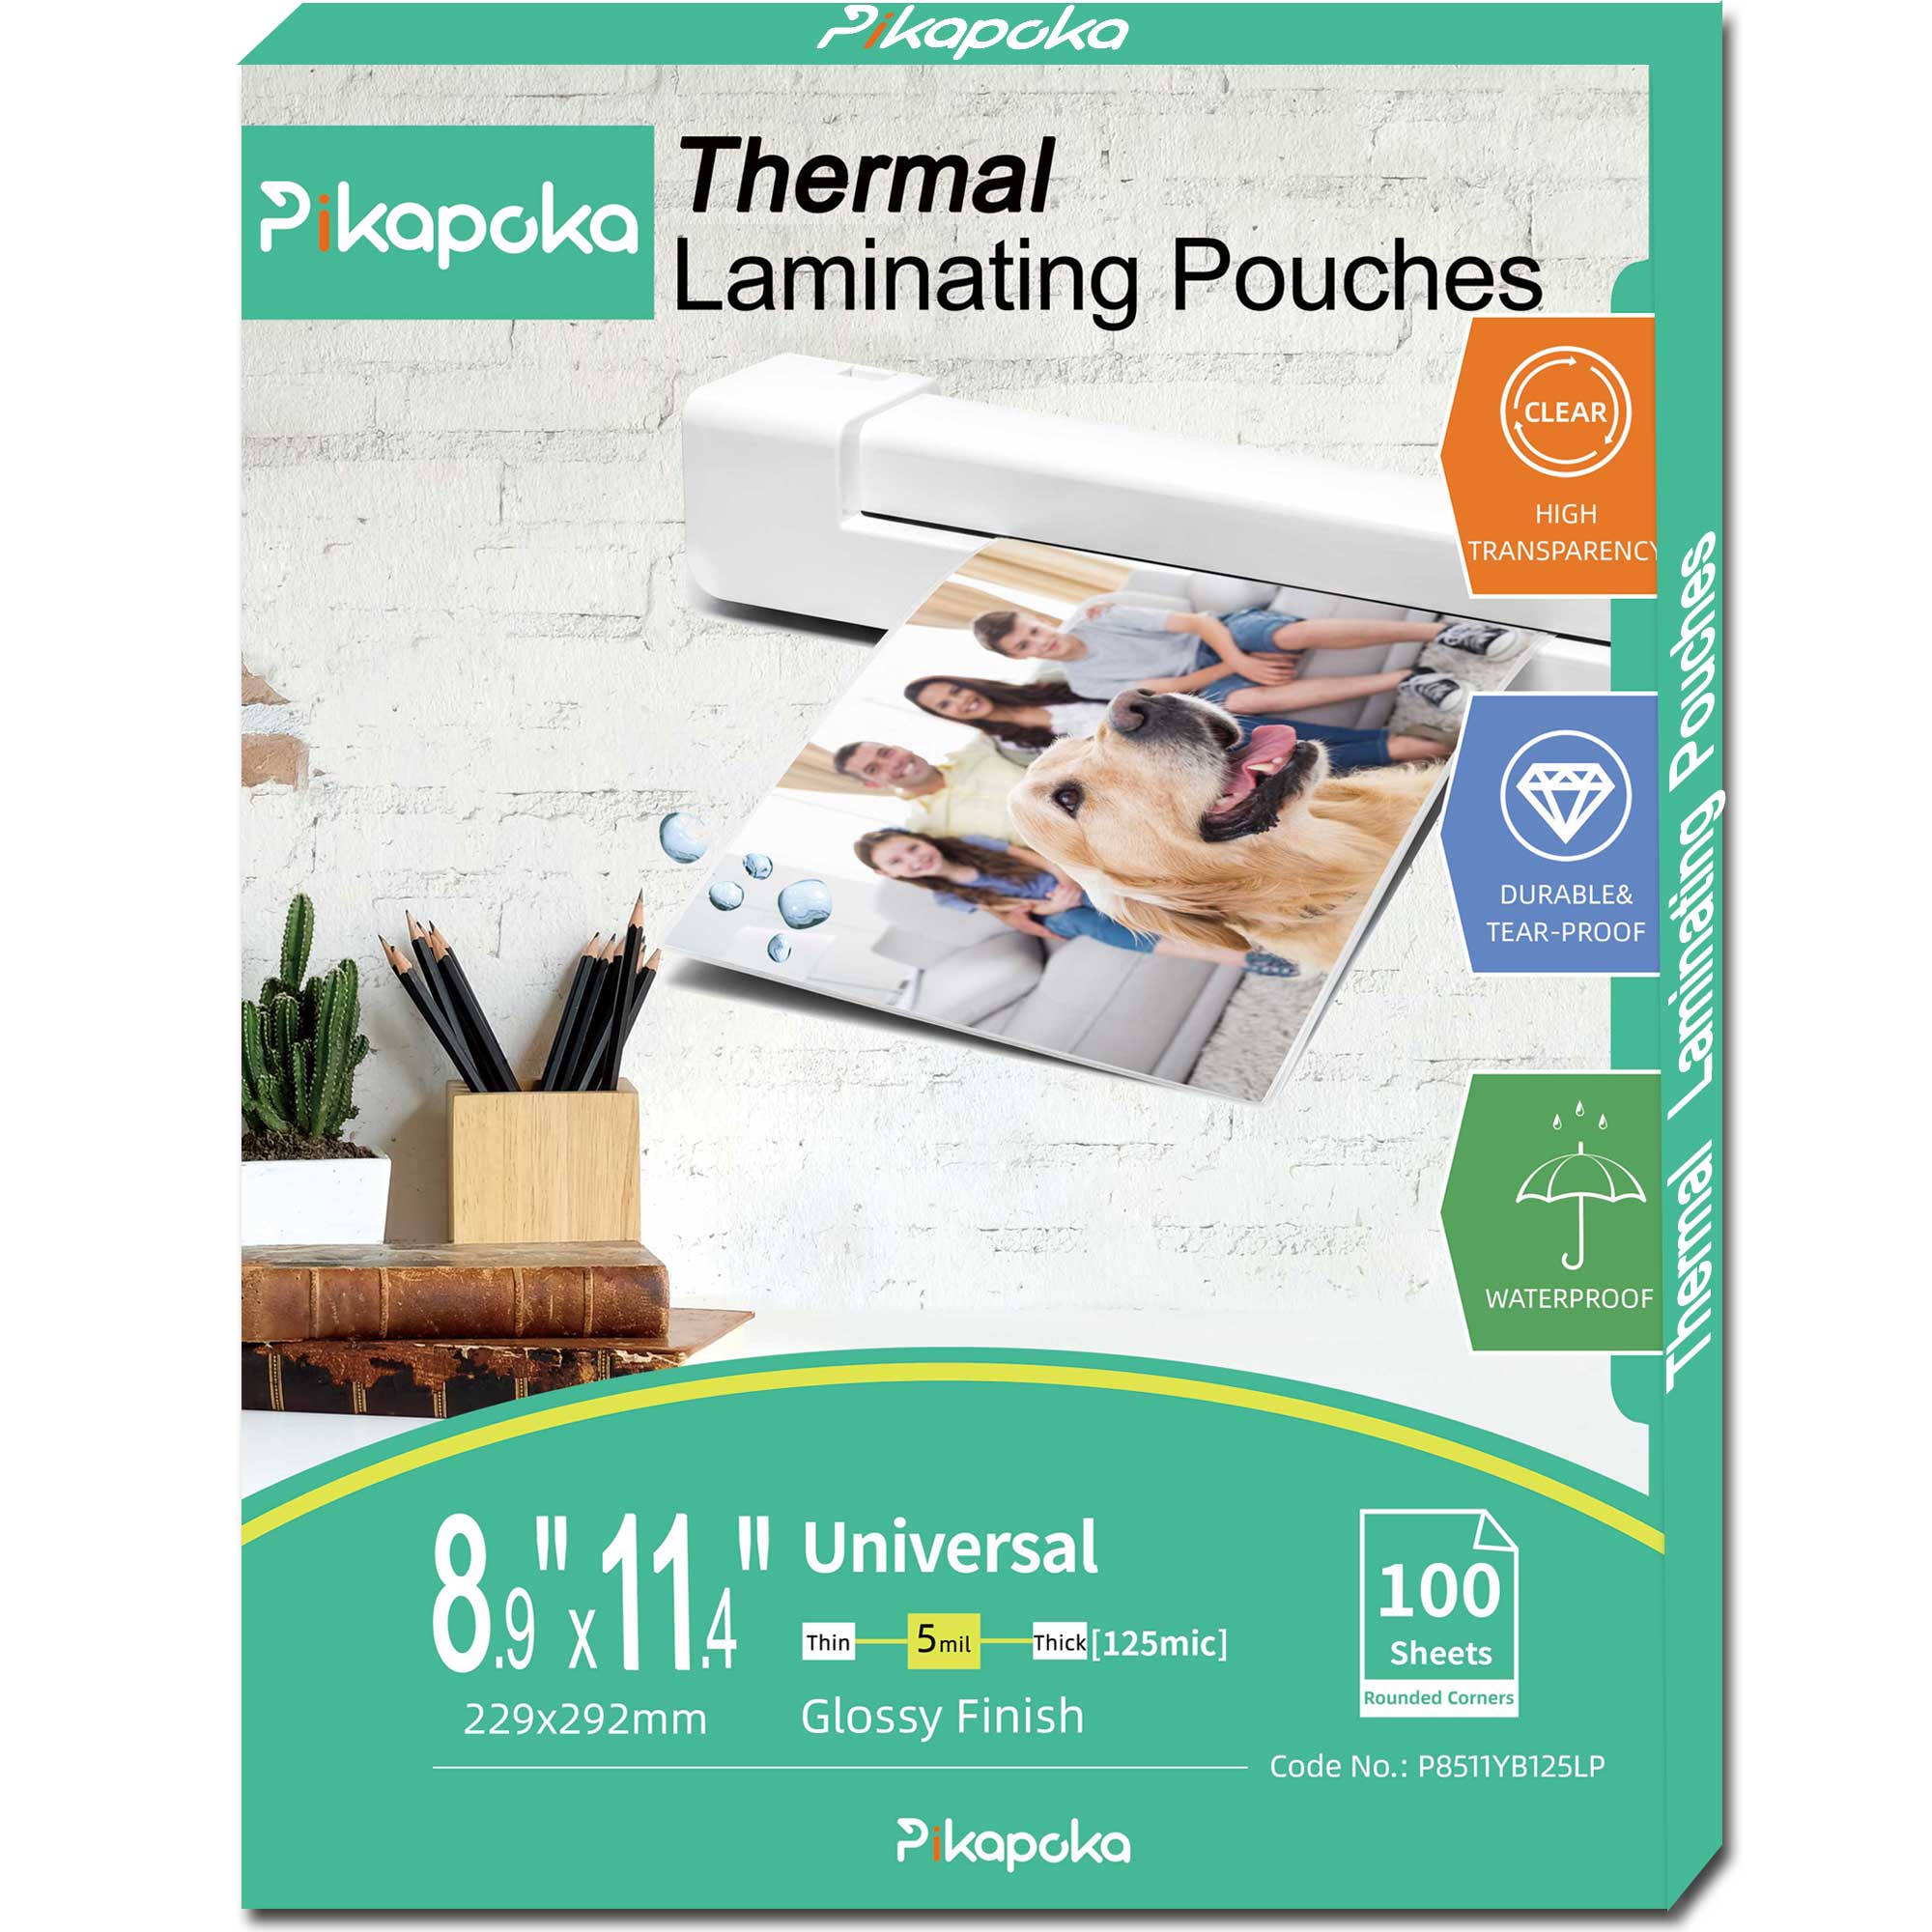 BESTEASY Thermal Laminating Pouches 100 Pack, 8.9 x 11.4-Inches, 5 Mil Thick